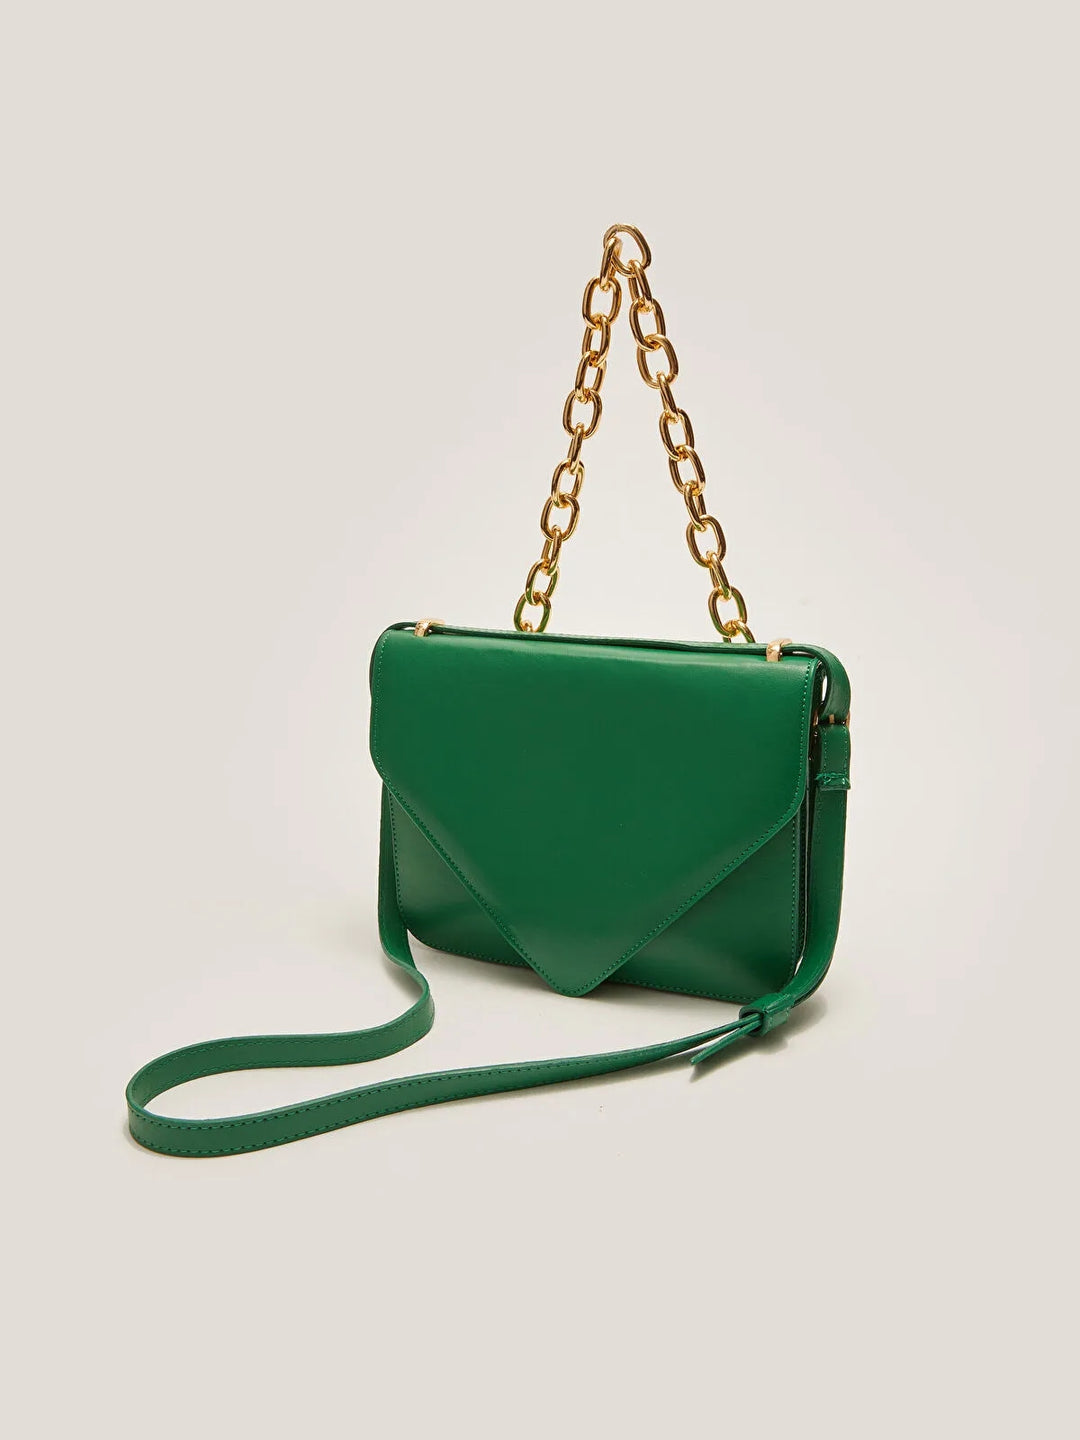 Women Shoulder Bag With Chain Strap Clamshell